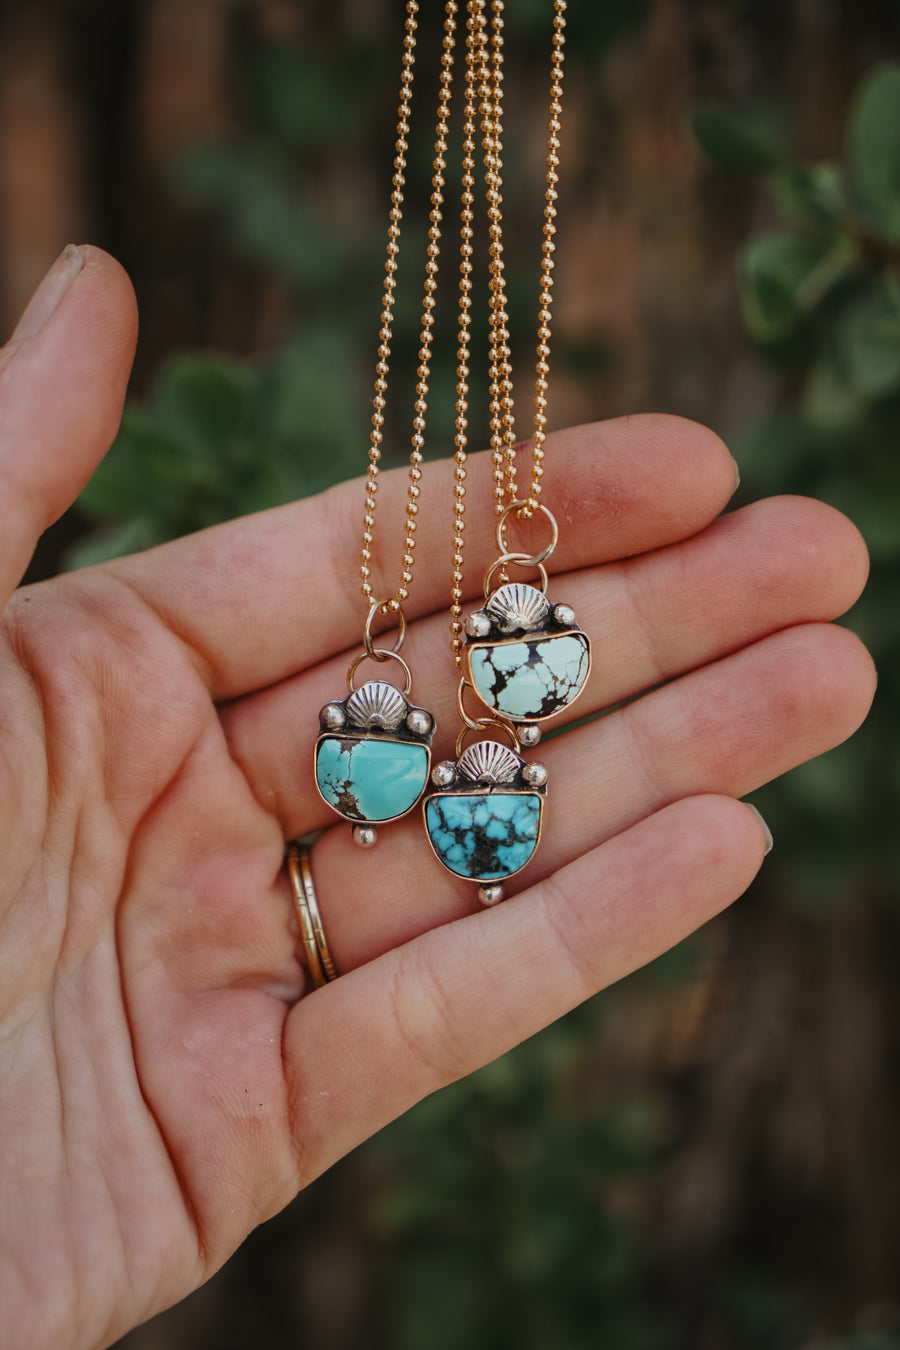 The Golden Hour Necklaces in 14K Gold, Sterling Silver, Gold-Fill with Yungai Turquoise